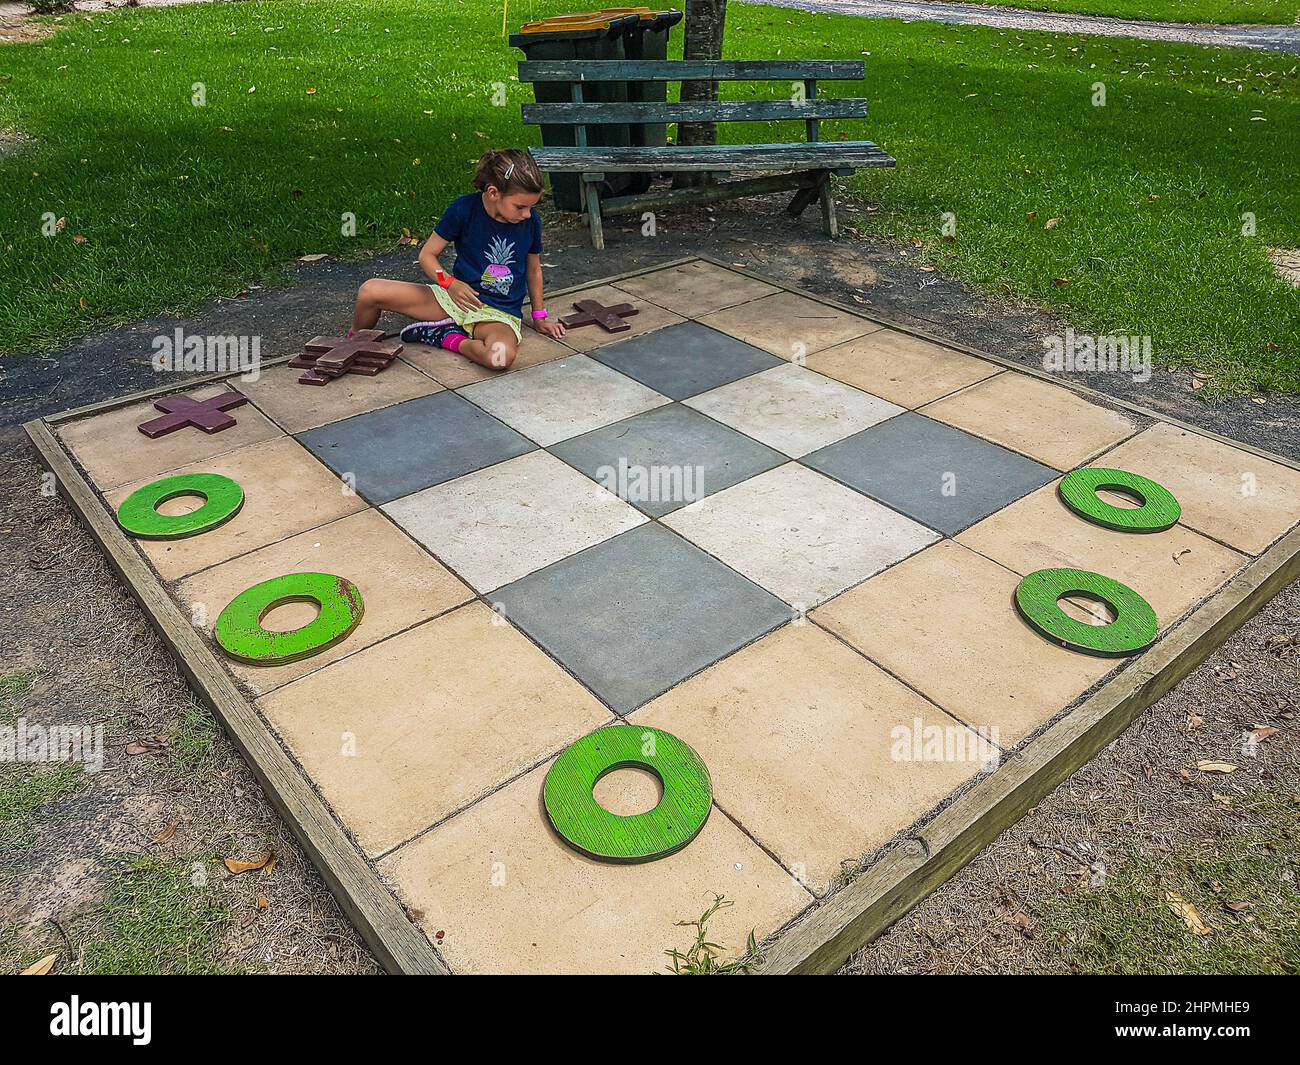 A girl plays Tic Tac Toe (Noughts and crosses) on a large board at Amazement farm and fun park, Yarramalong, Central Coast, NSW, Australia Stock Photo